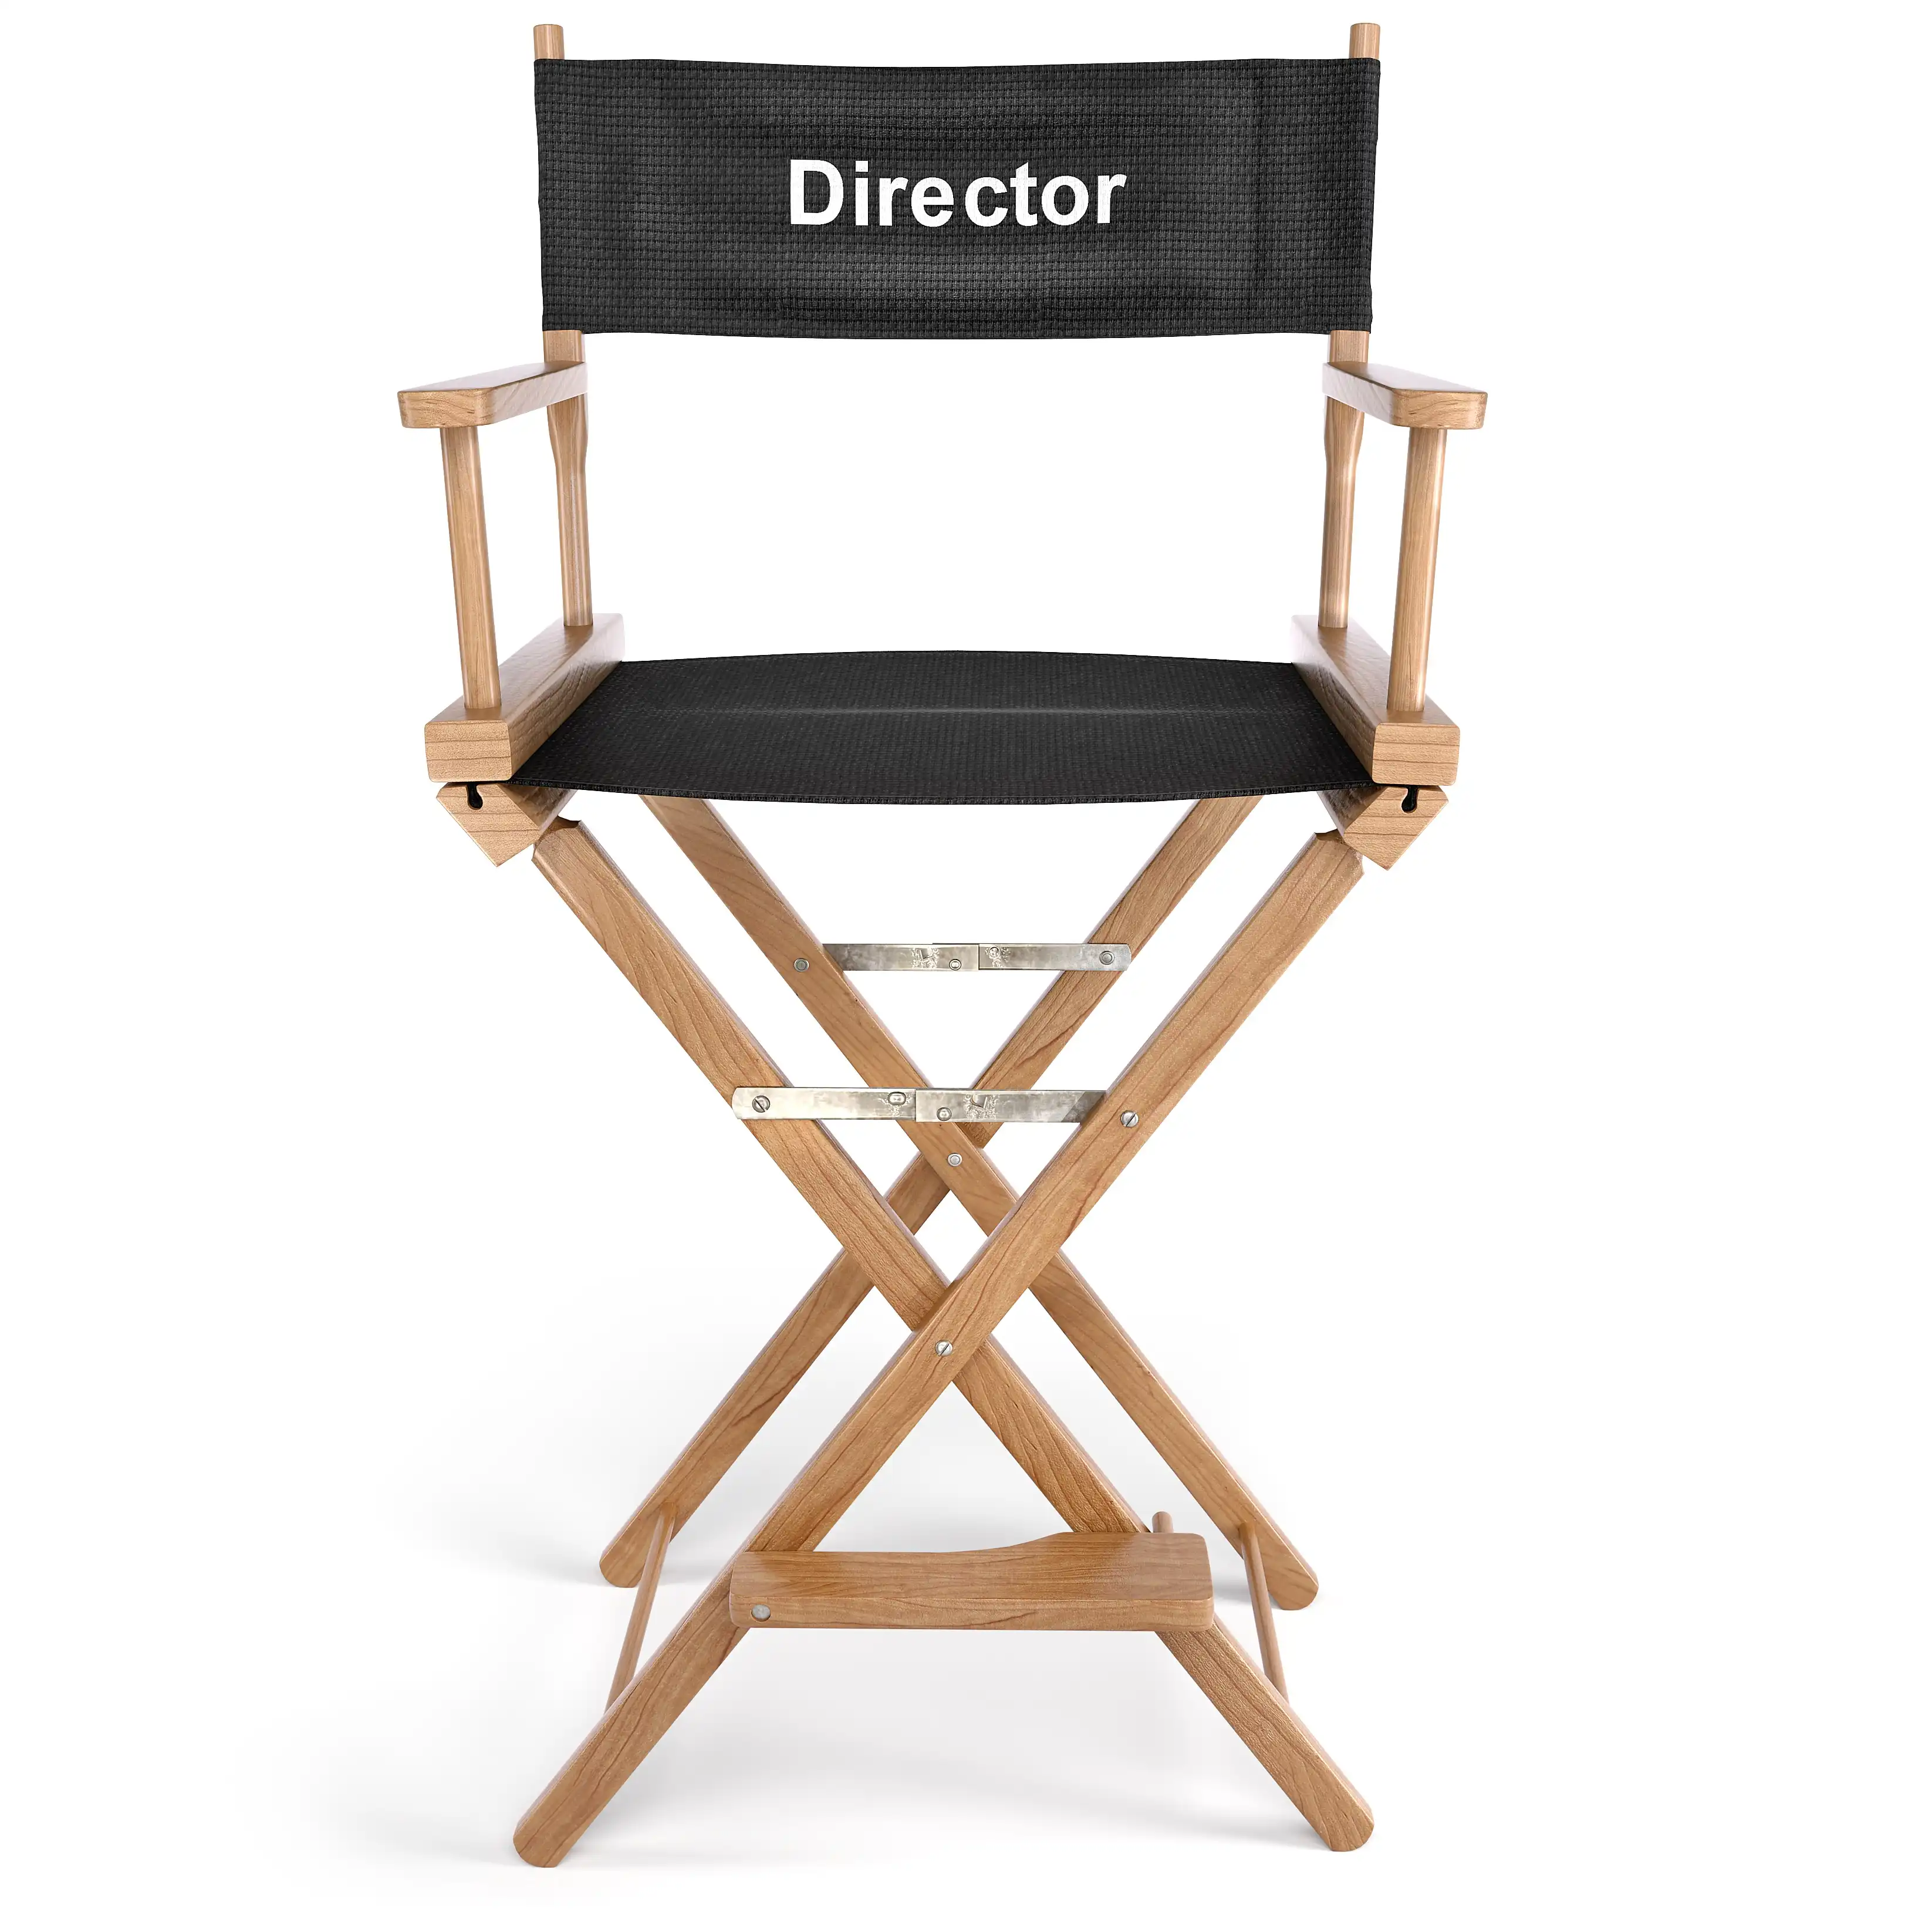 Typical High Director's Chair 3D Model